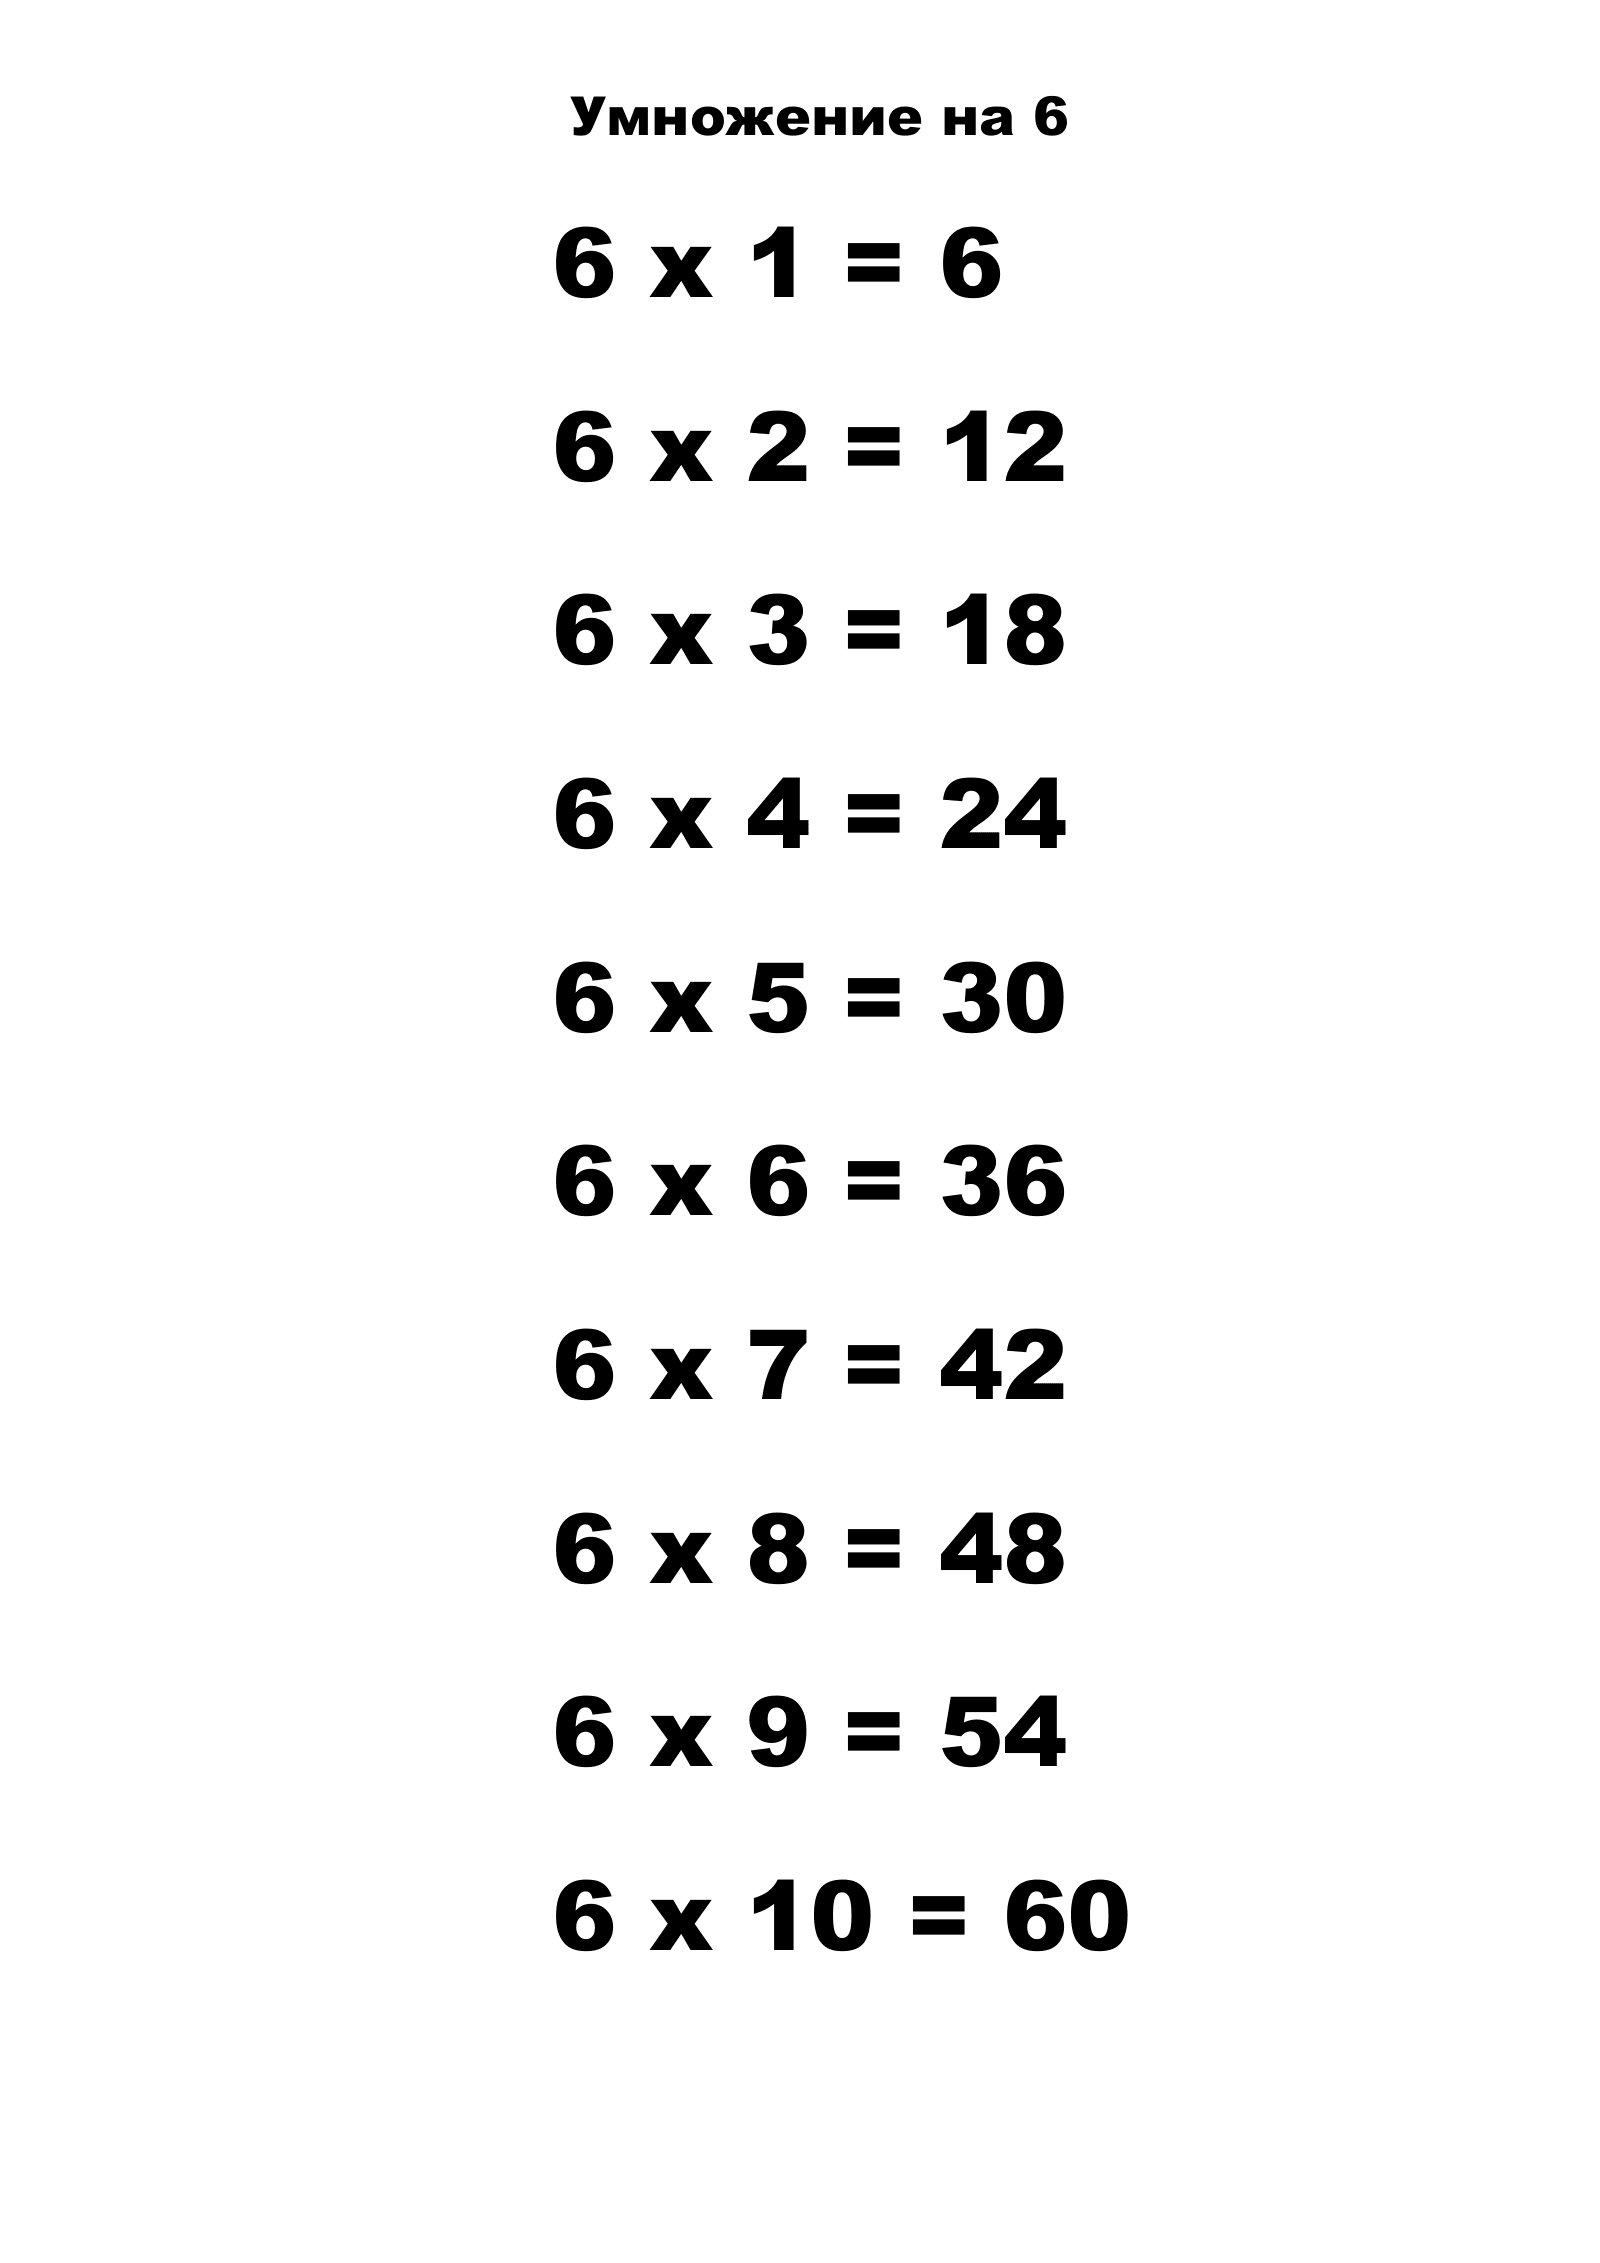 Multiplication Table for 6.